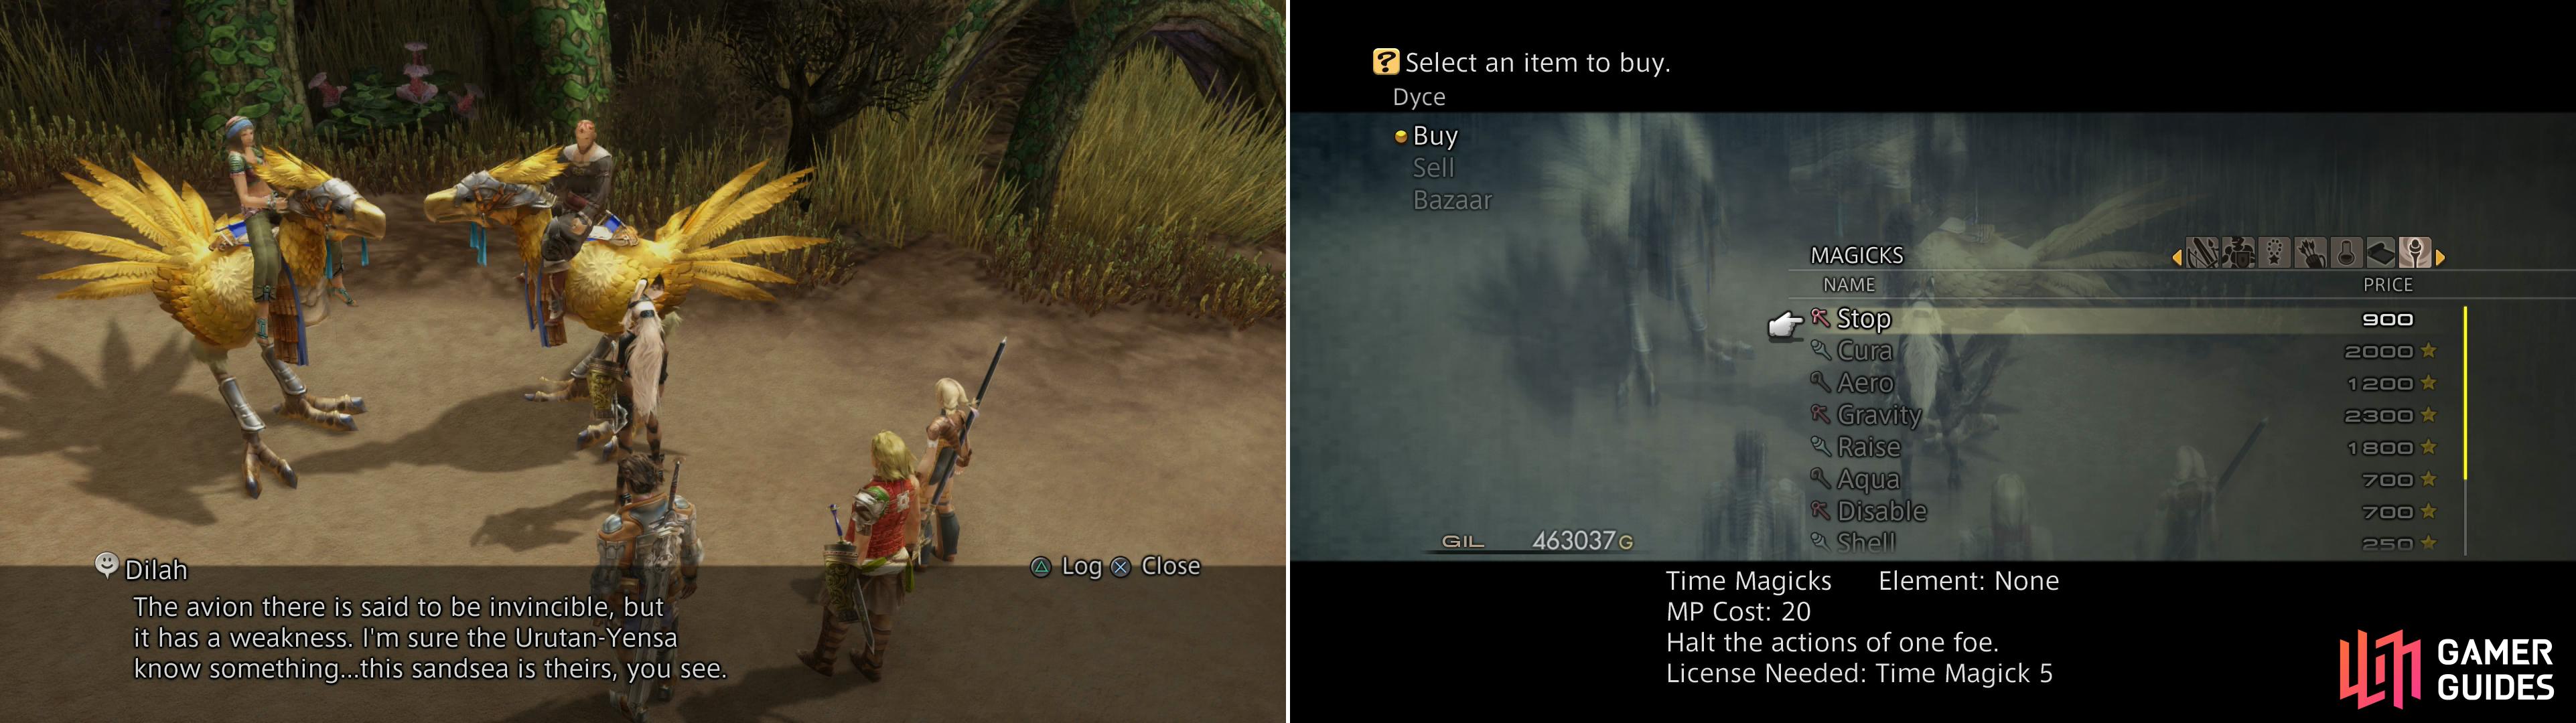 Talk to the mounted merchant to gain some advice about a foe looming ahead (left). You can also buy new magicks from him (right).